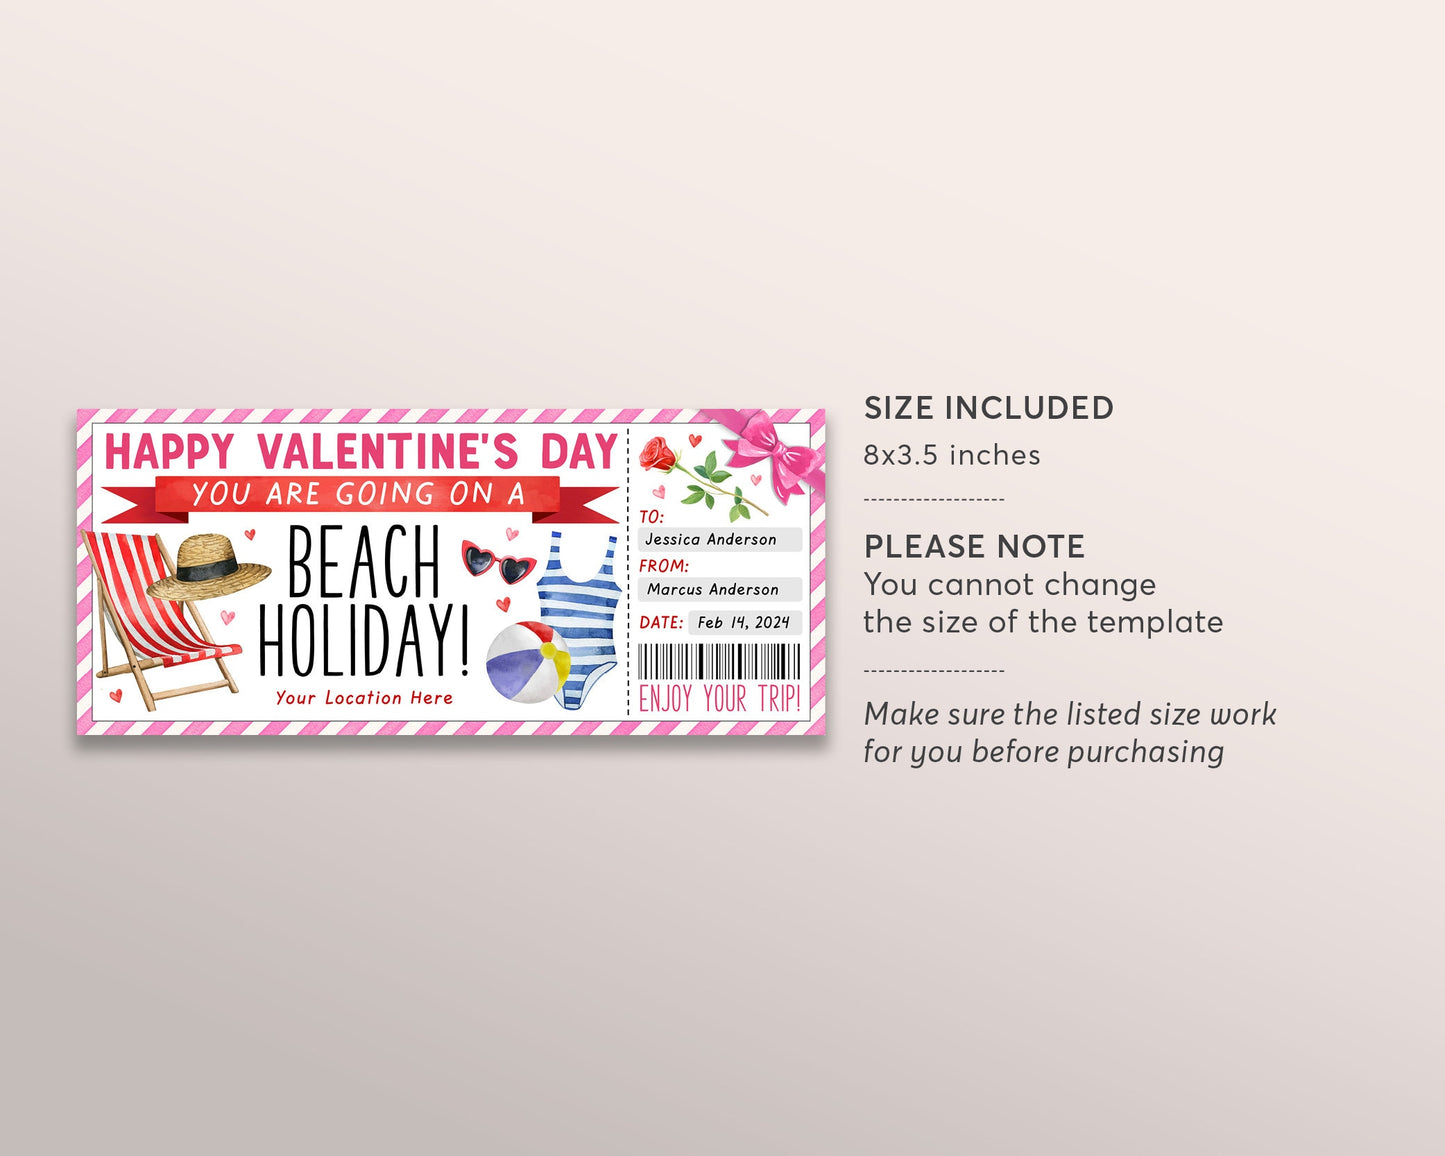 Valentines Day Tropical Beach Vacation Ticket Editable Template, Beach Holiday Getaway Reveal Gift Certificate, Resort Gift Voucher